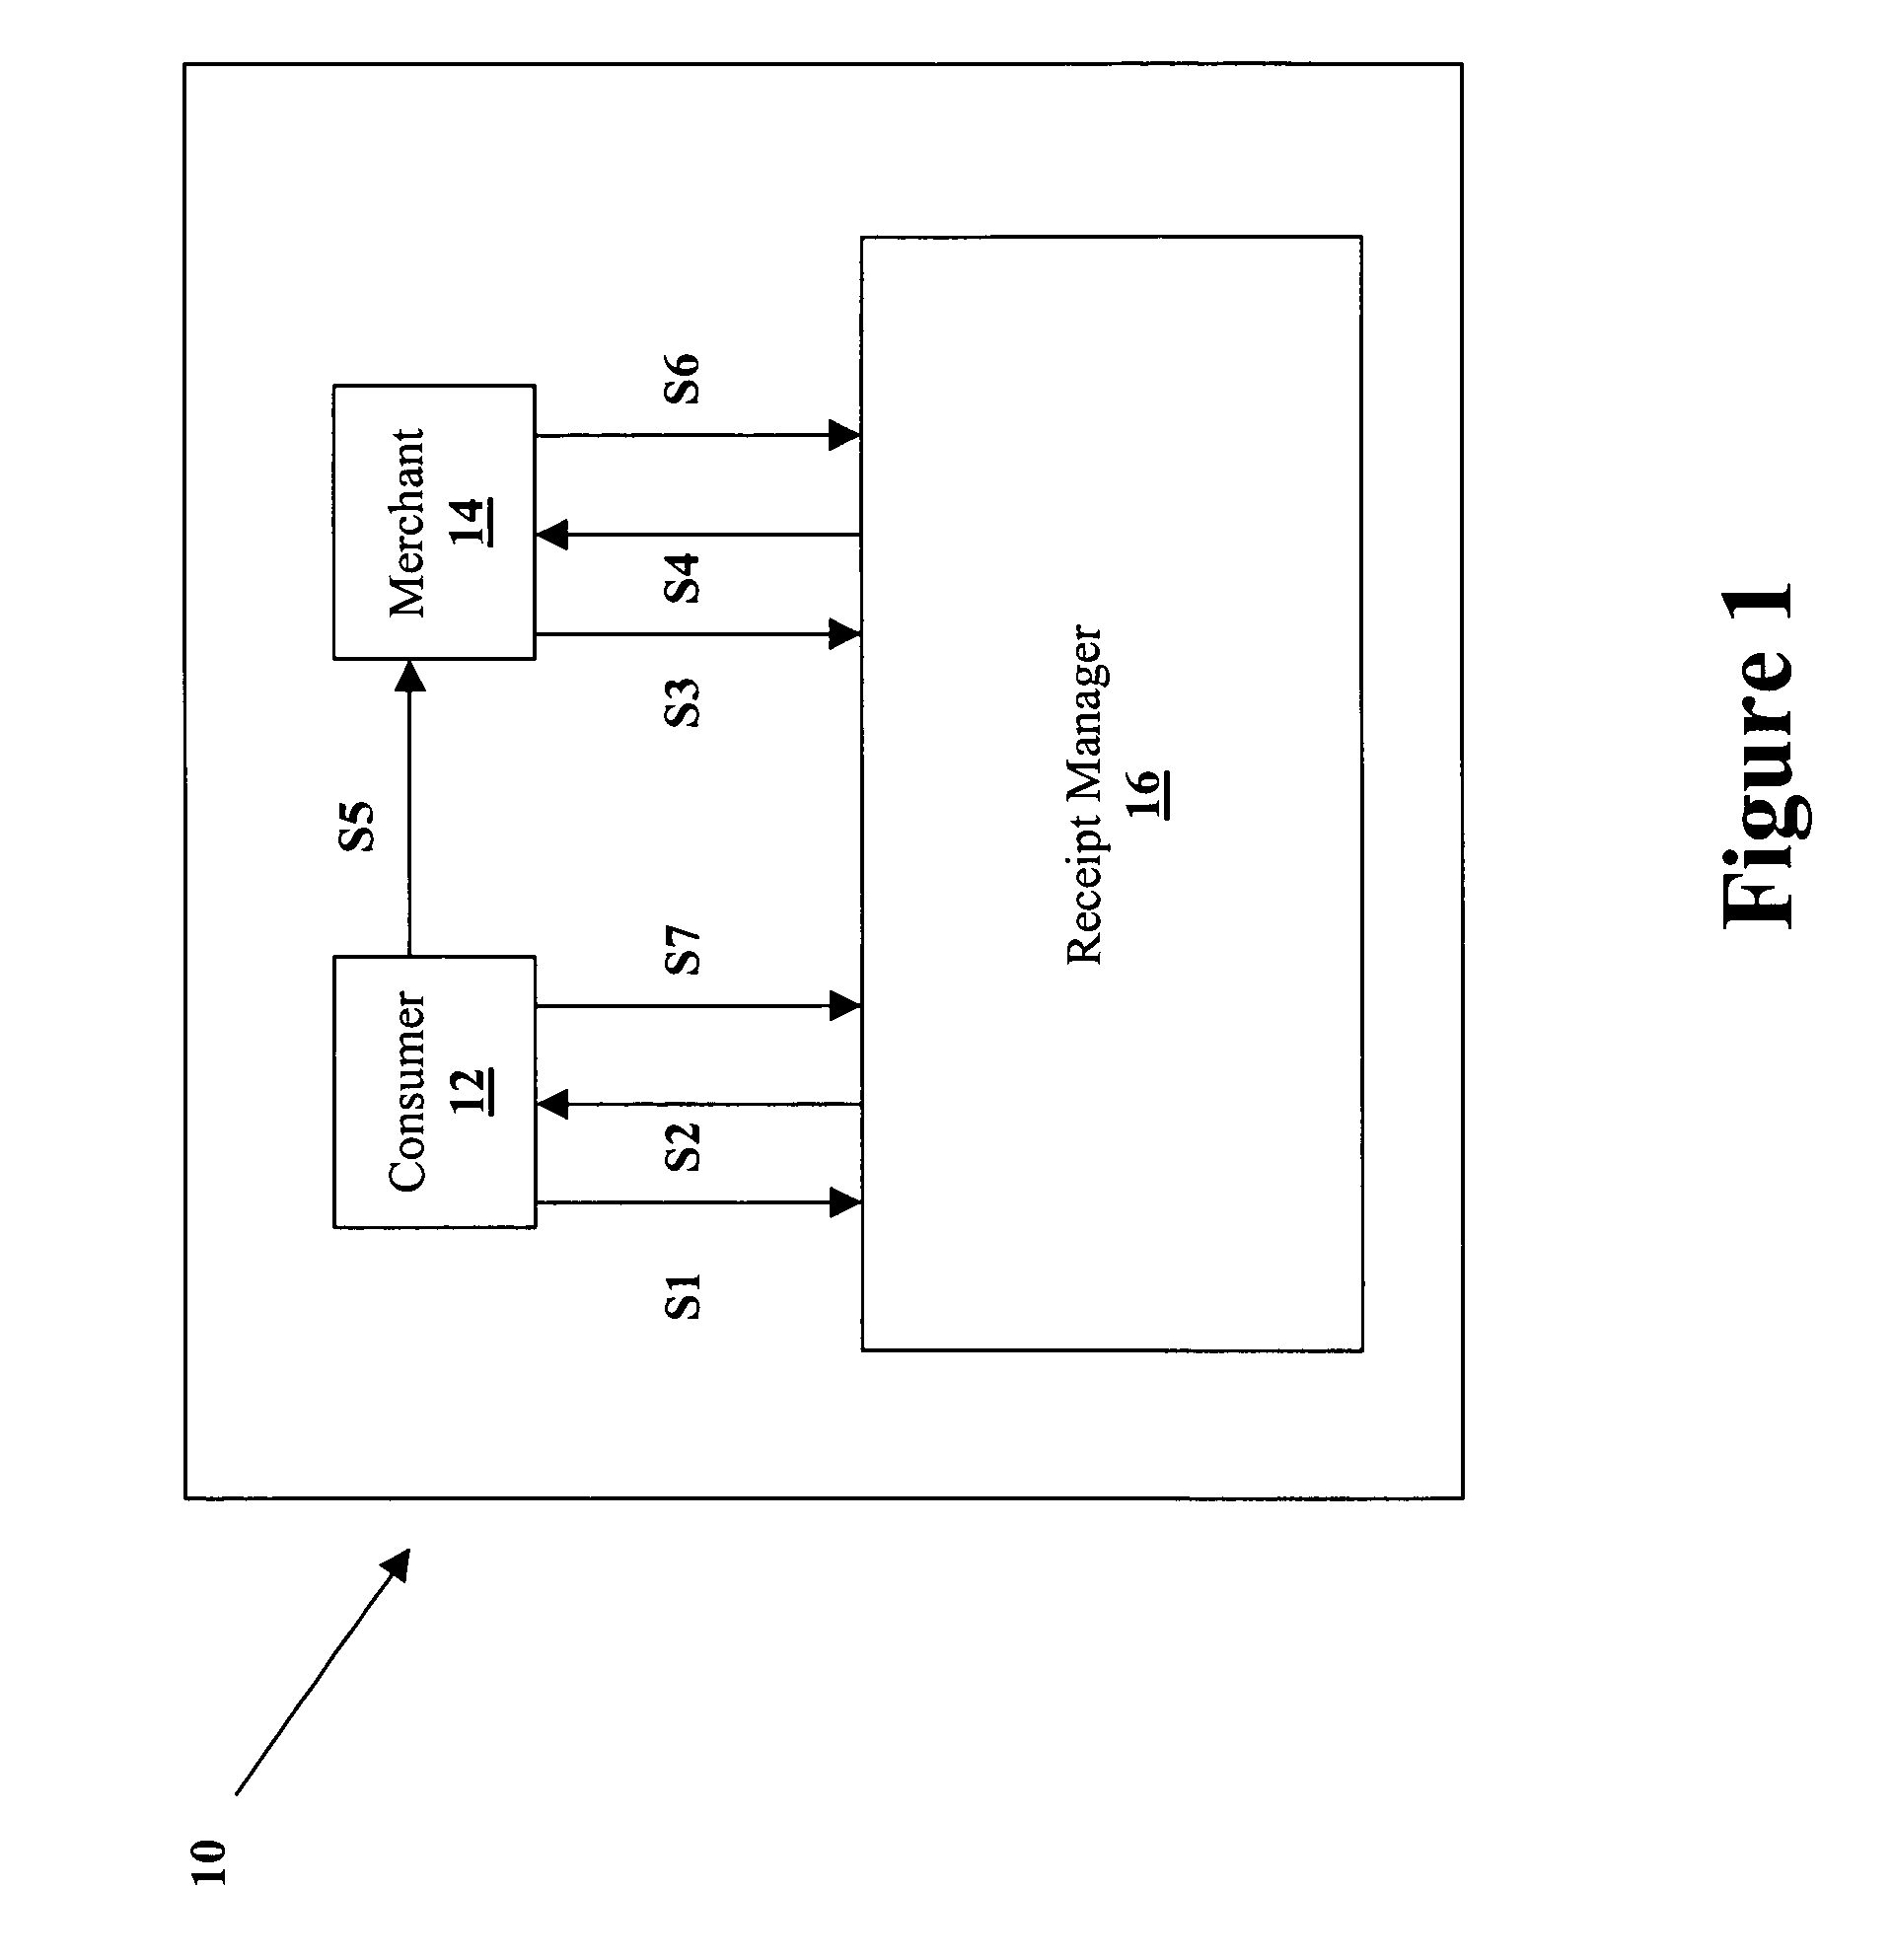 Method and system for associating consumers with purchase transactions